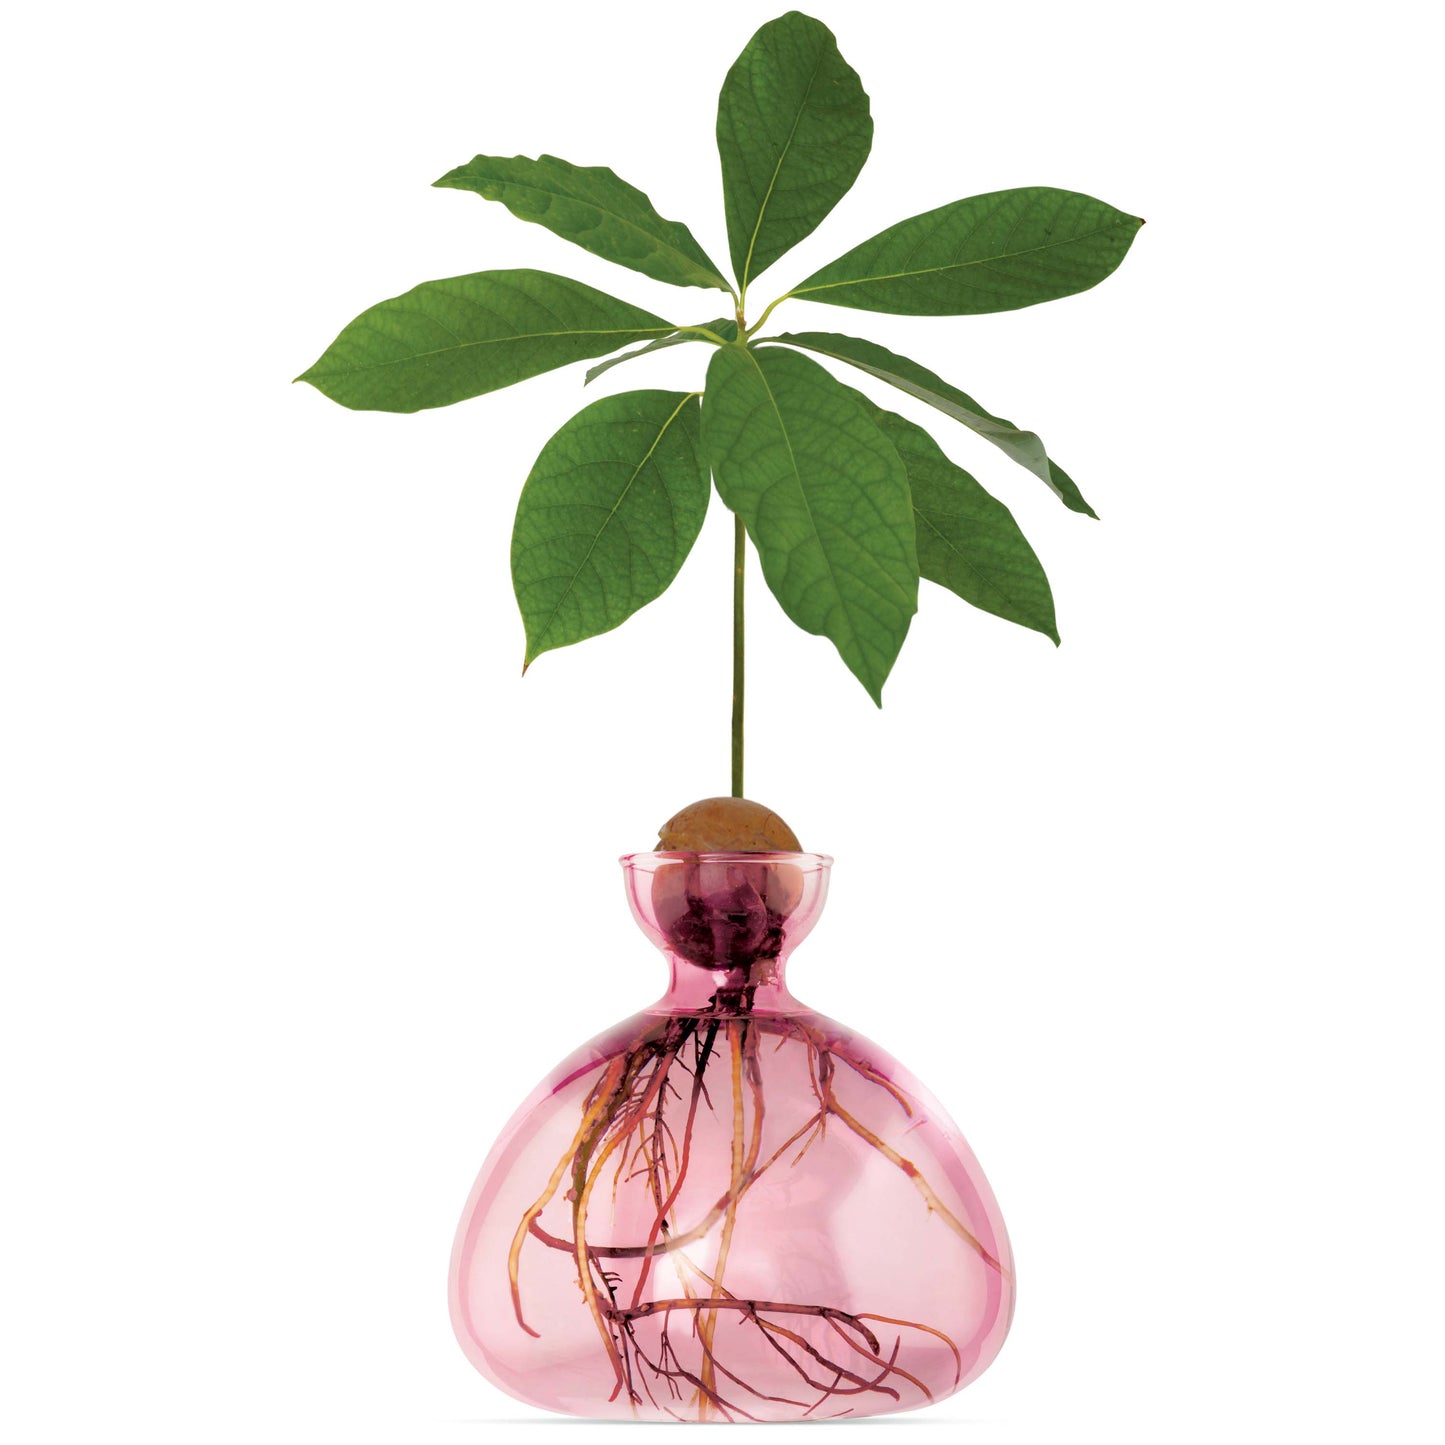 A pink vase with a grown plant from an avocado seed